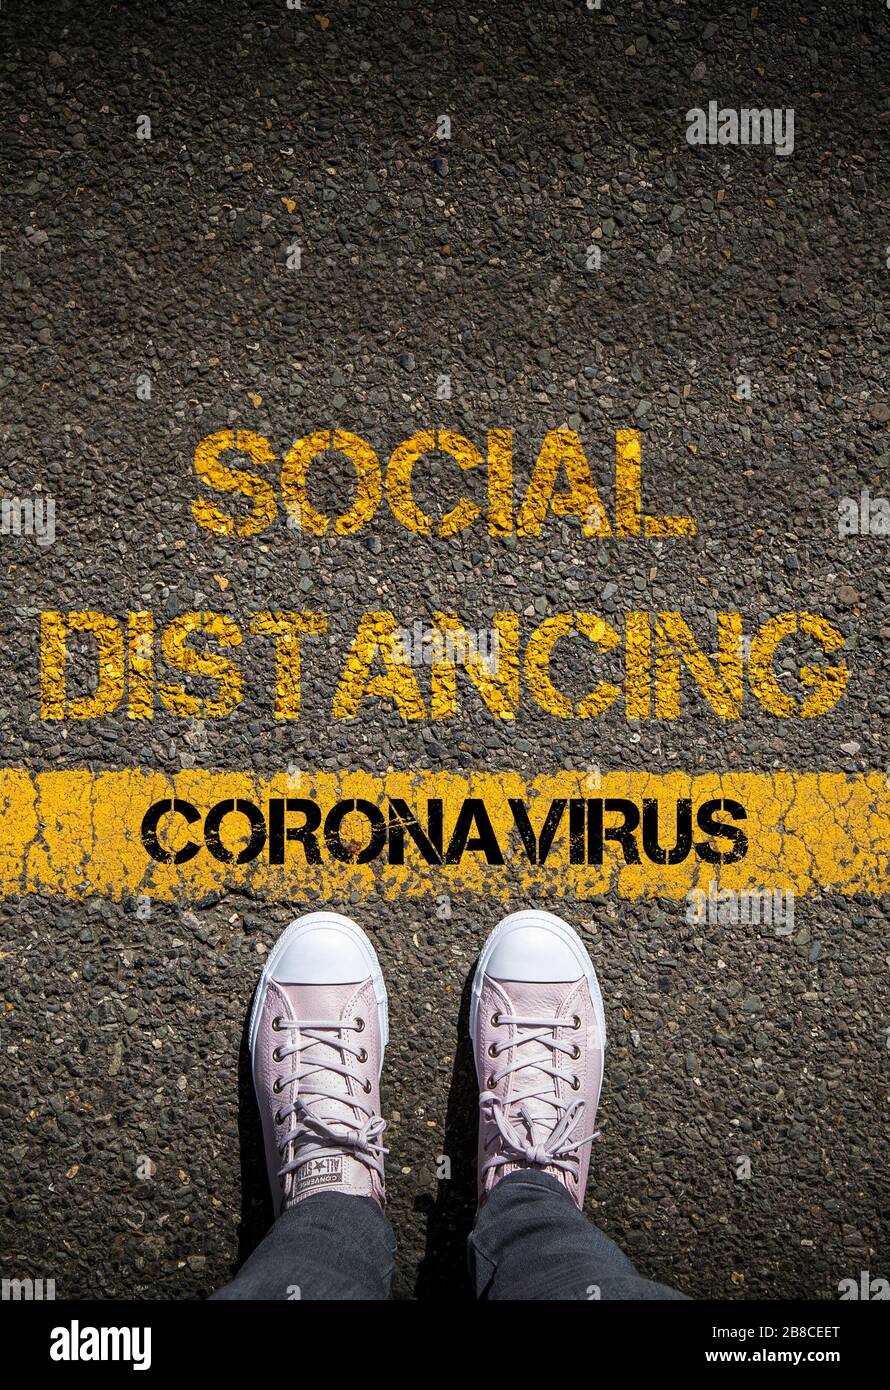 Social distancing to reduce the spread of Coronavirus, concept image. Stock Photo